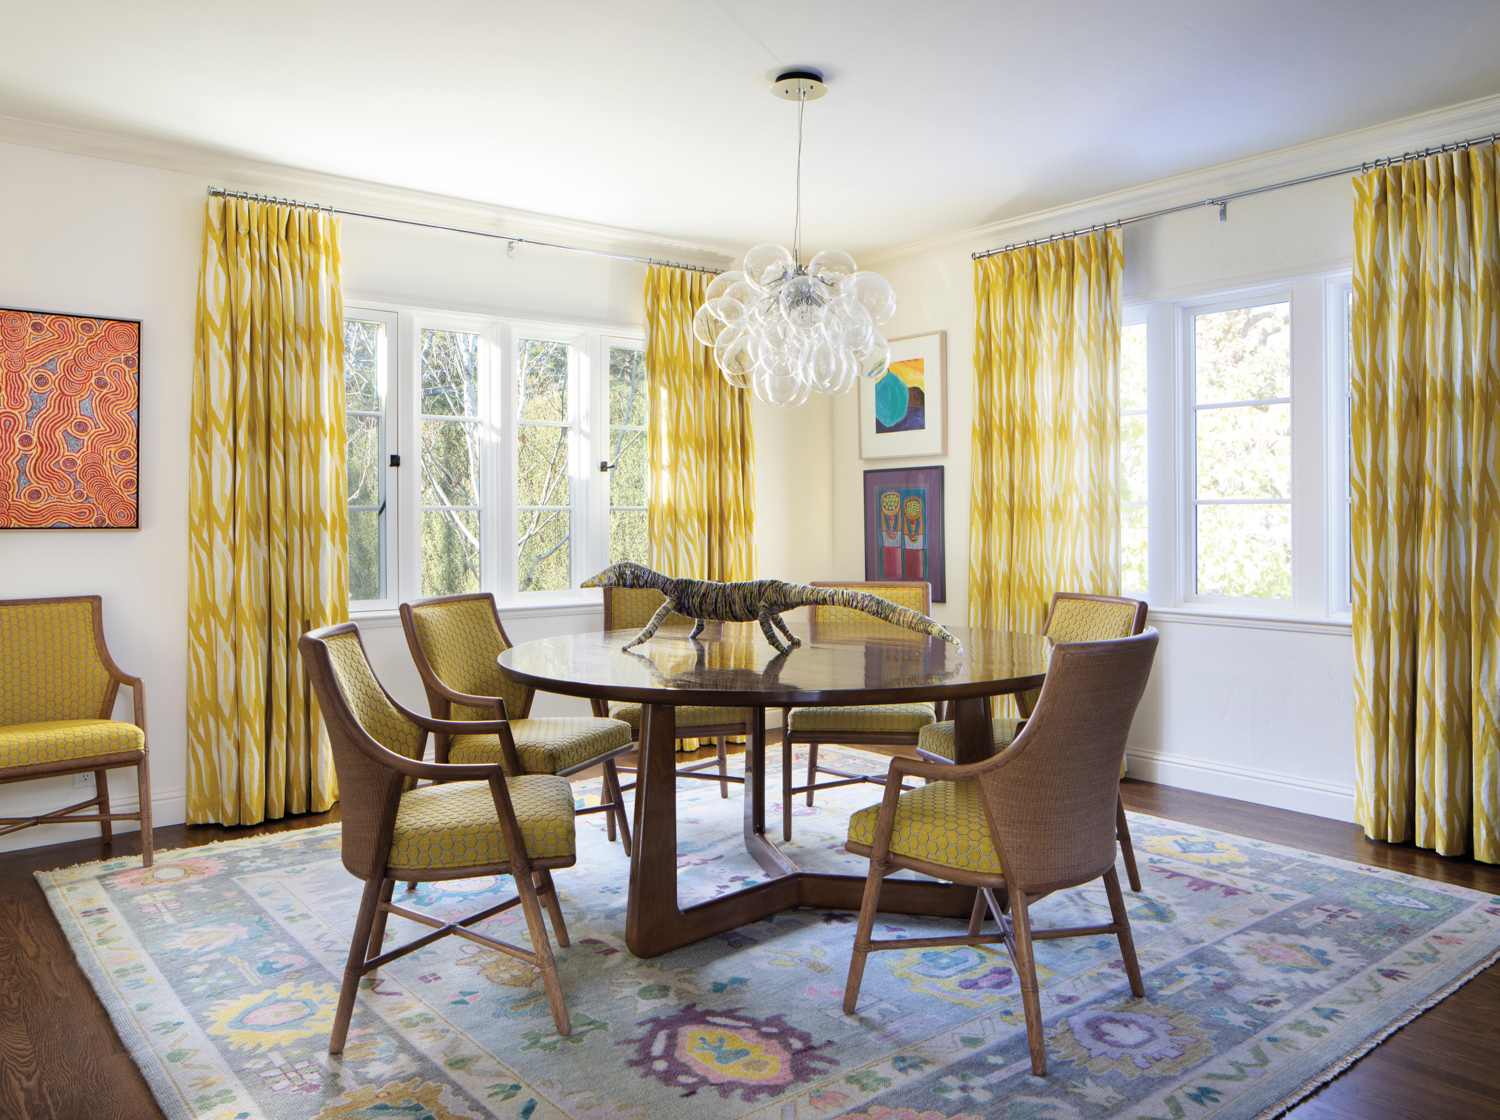 Dining area with bubble-like chandelier over a round table surrounded by yellow upholstered chairs and set against windows flanked by yellow drapes.